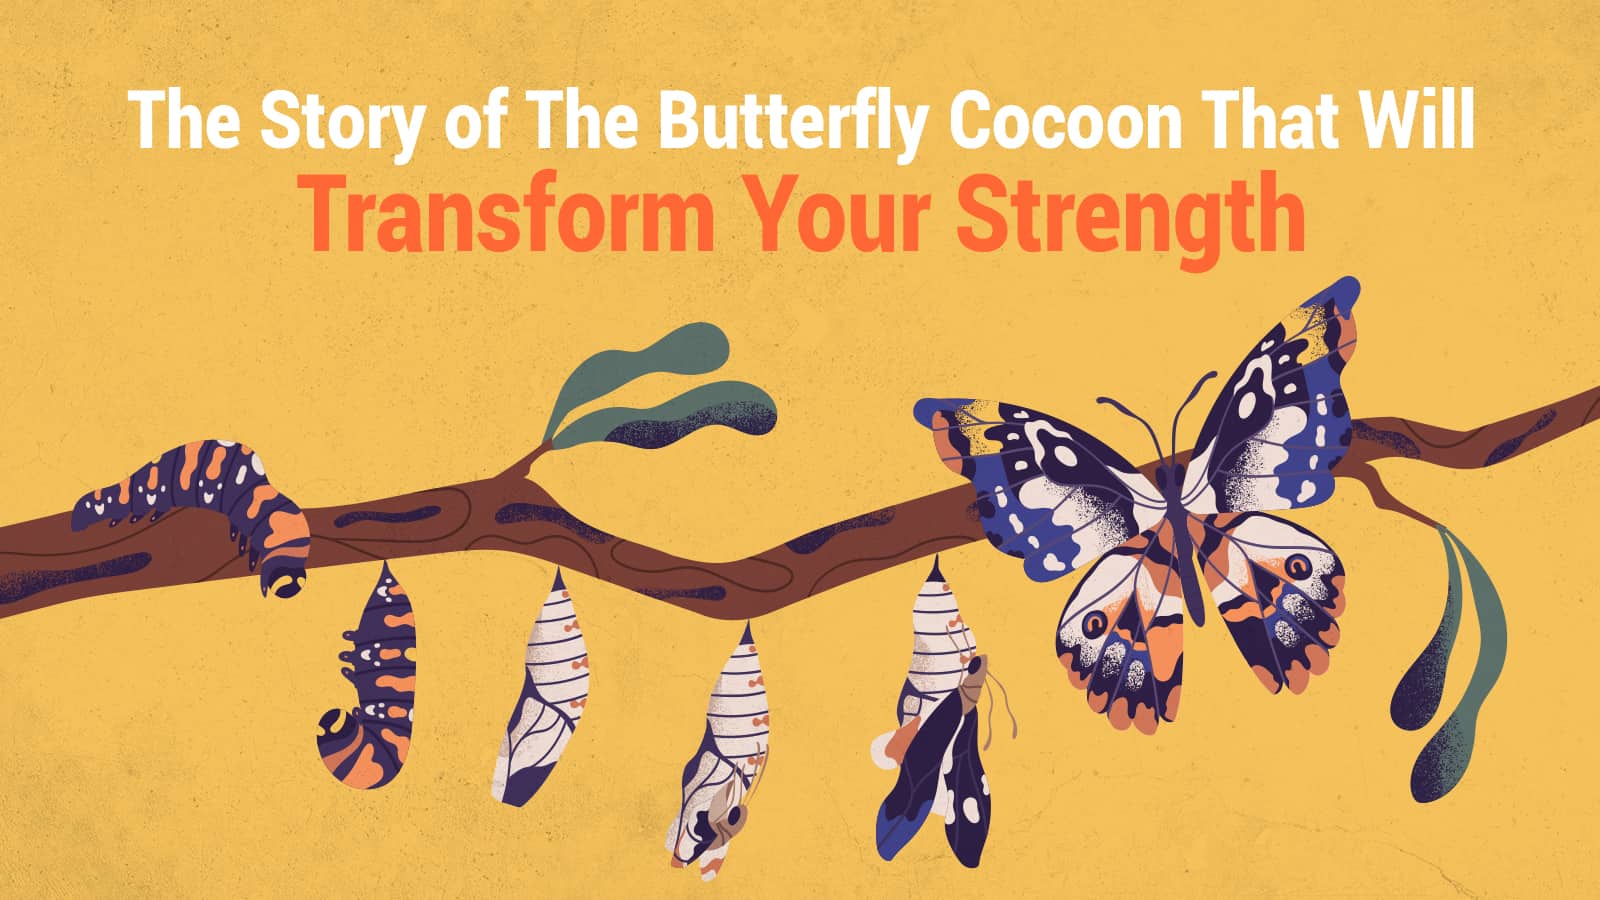 The Story of The Butterfly Cocoon That Will Transform Your Strength